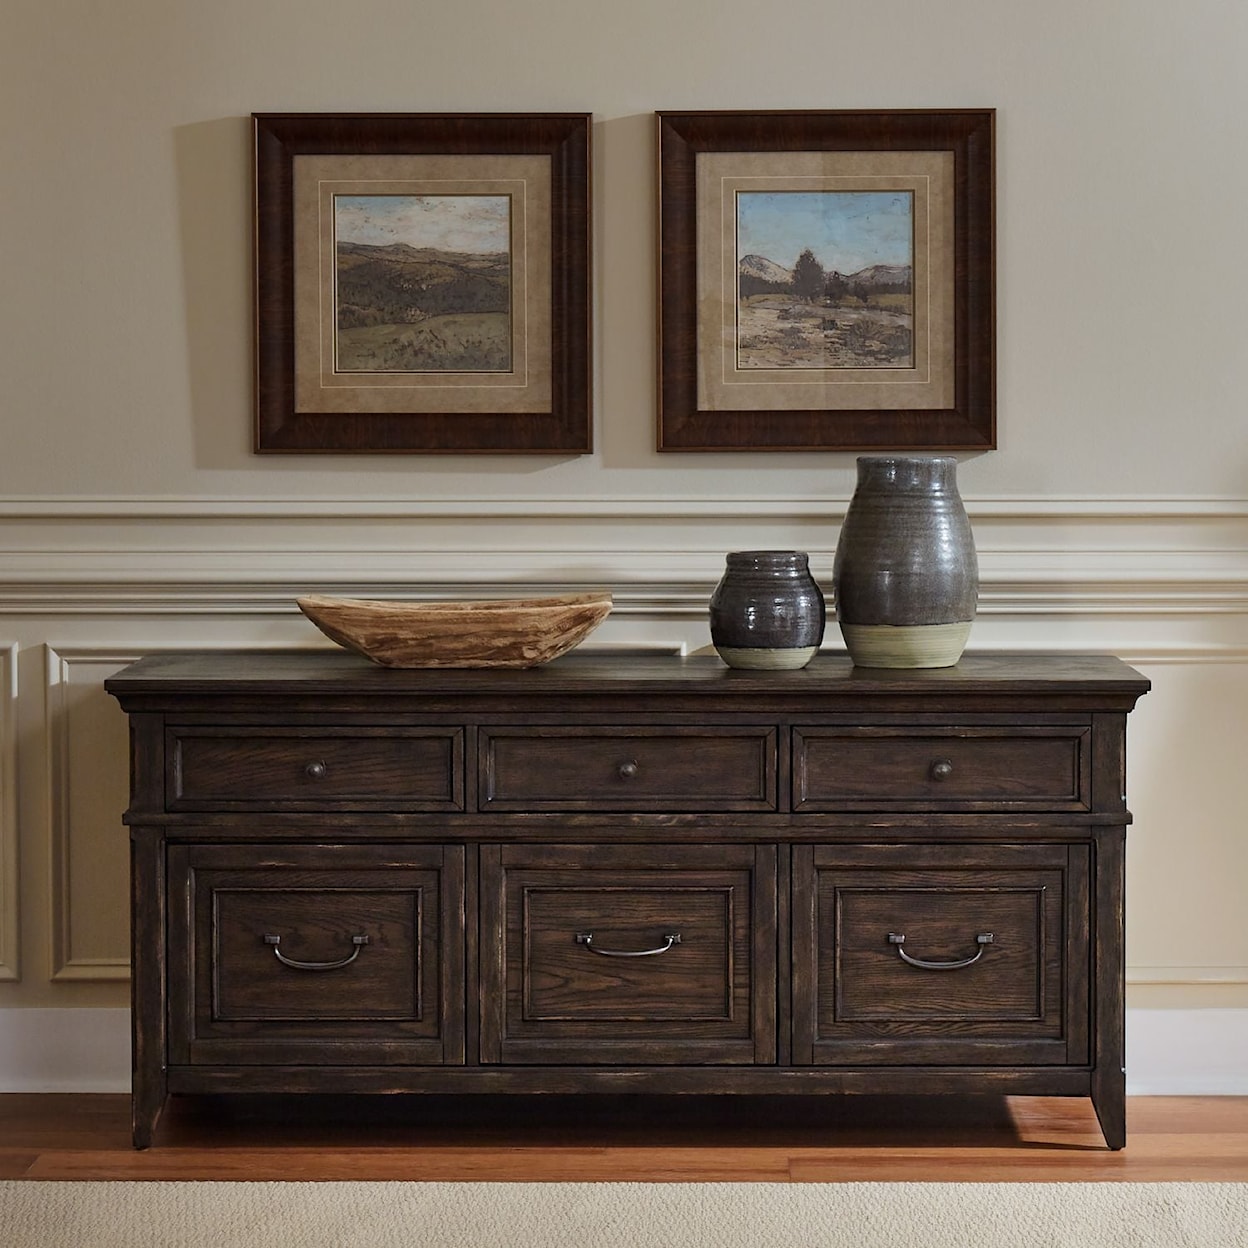 Libby Paradise Valley 6-Drawer Credenza